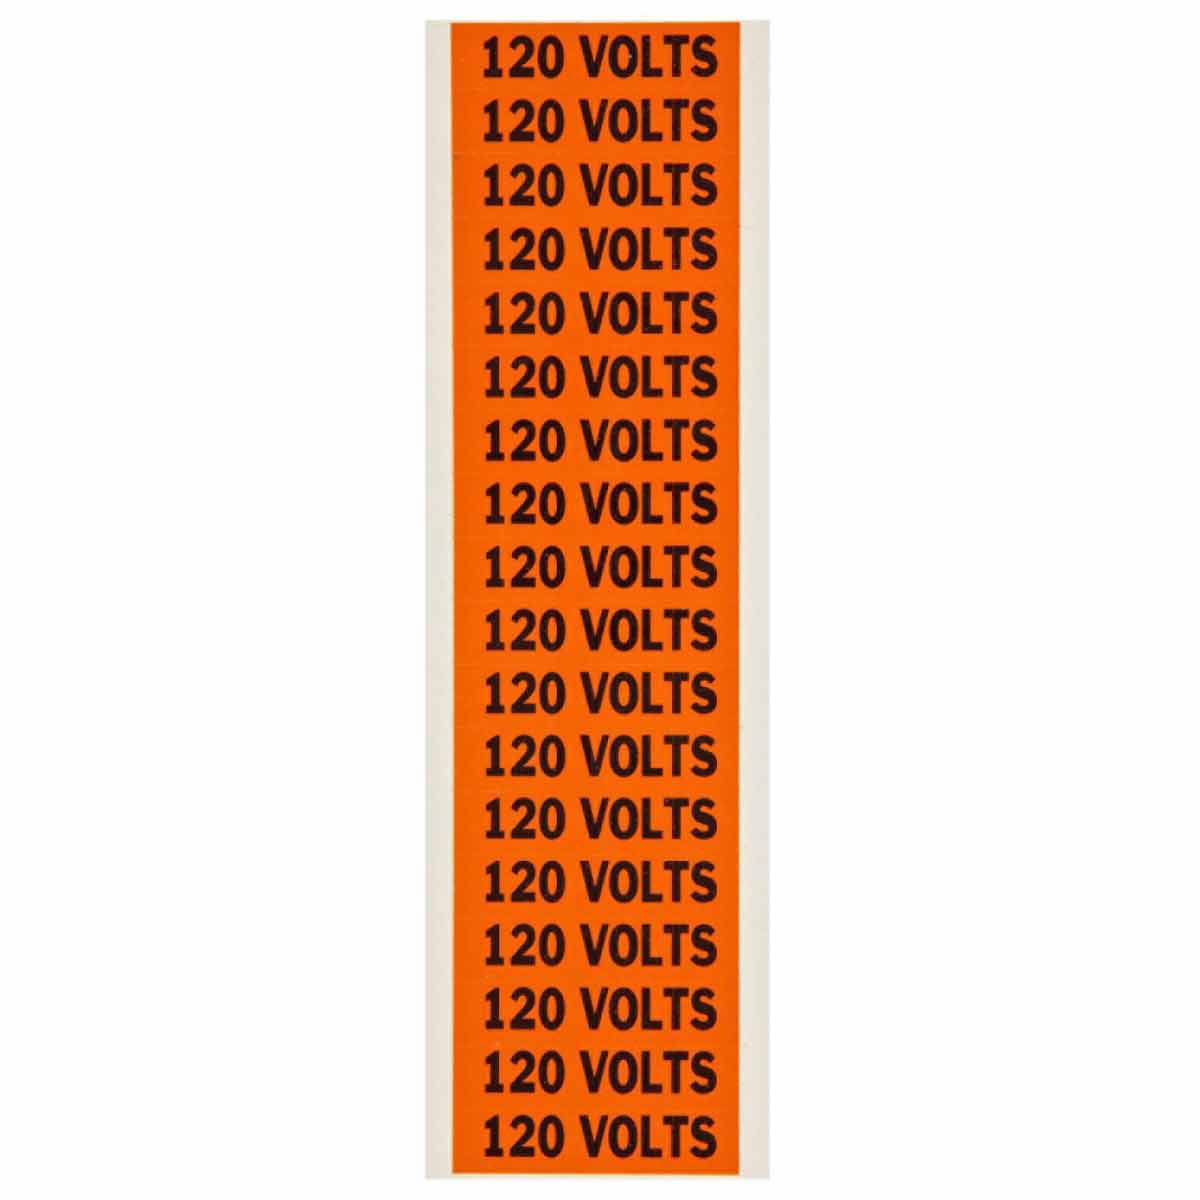 Brady 44215 1-1/8 Height B-498 Repositionable Vinyl Cloth Black On Orange Color Conduit And Voltage Markers Legend 480 Volts 4-1/8 Width 4 Per Card 